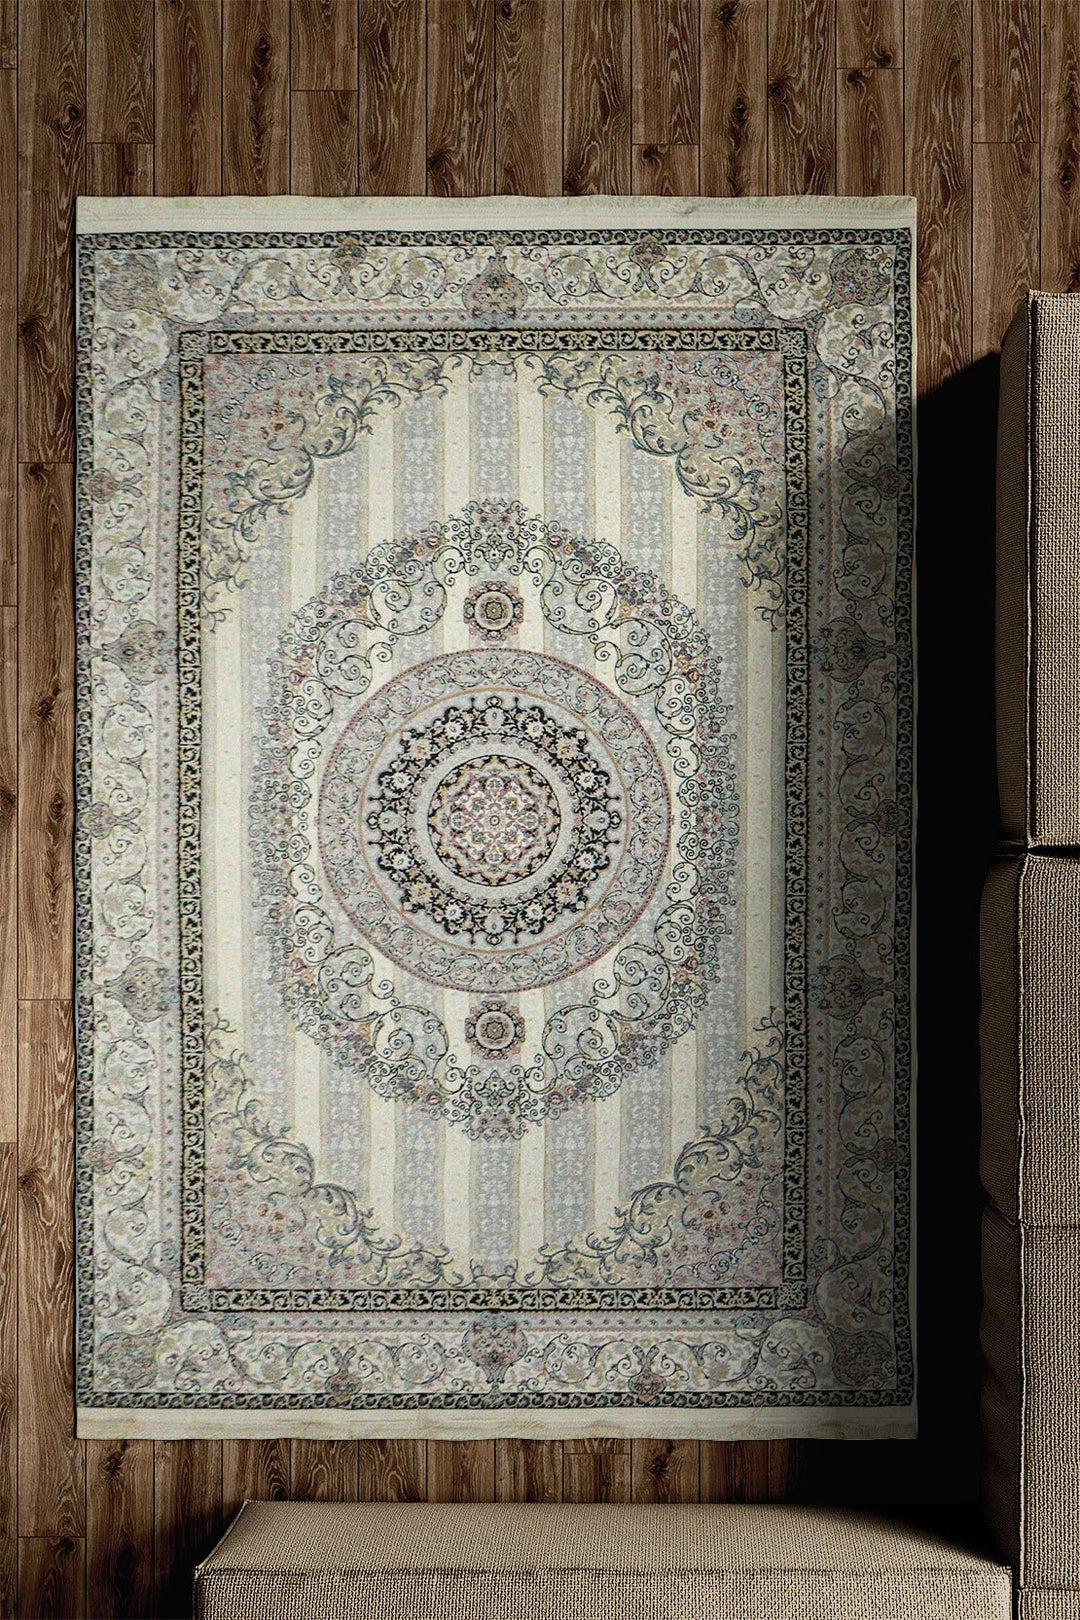 Iranian Premium Quality Hedyeh Collection (1000) Rug - 4.9 x 7.3 FT - Gray - Resilient Construction for Long-Lasting Use - V Surfaces